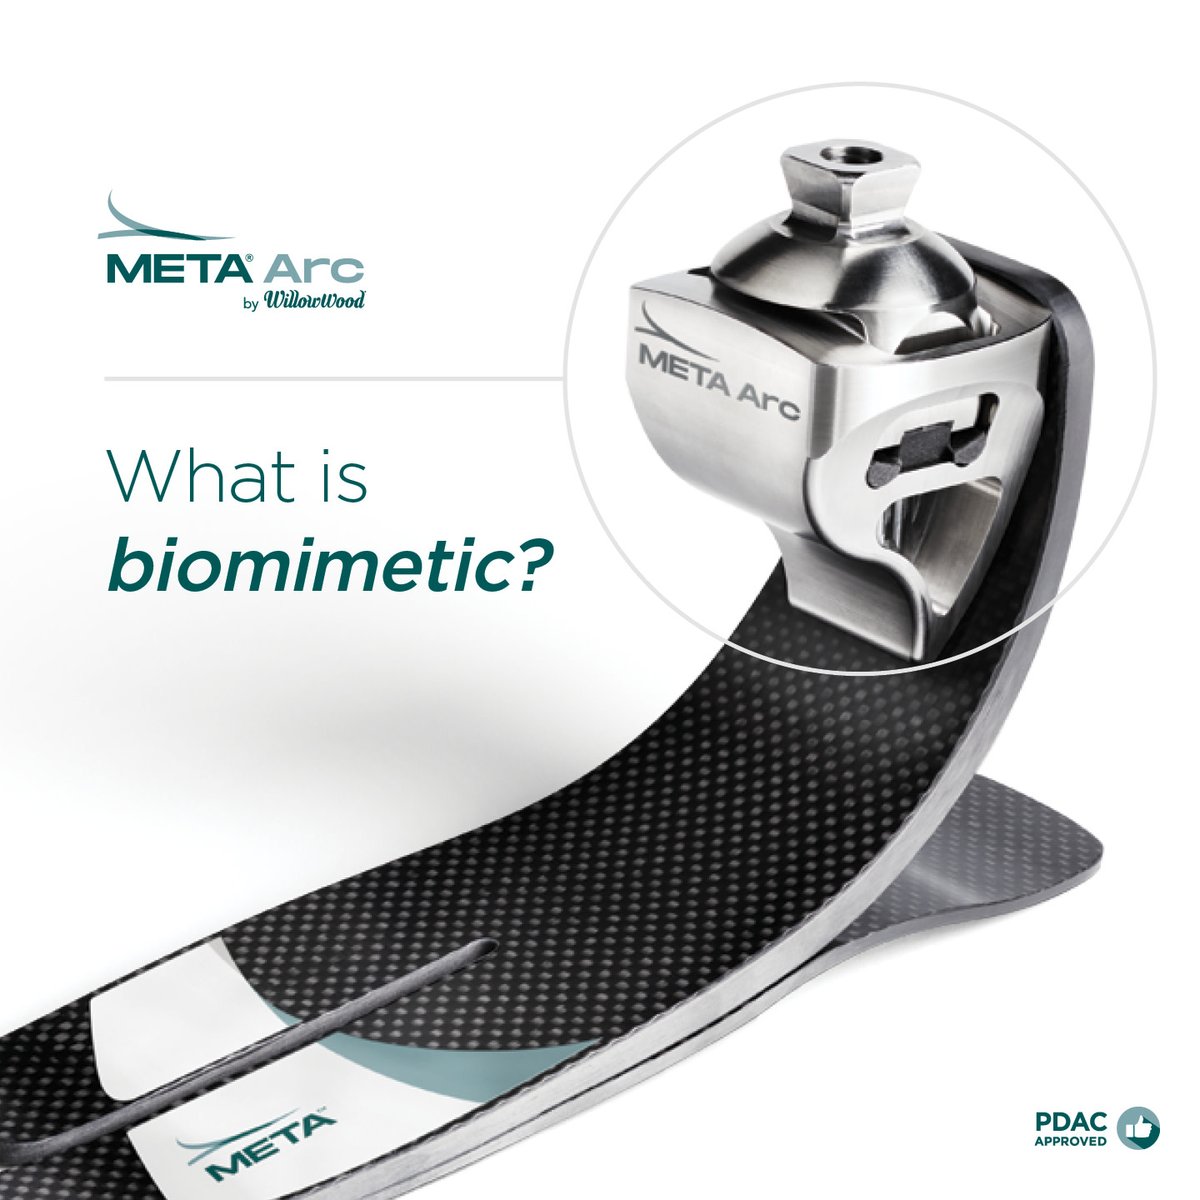 The META Arc is the first ankle engineered to closely mimic the anatomical ankle, resulting in the most natural feeling prosthetic ever. See META Arc in action at rb.gy/9r8hef